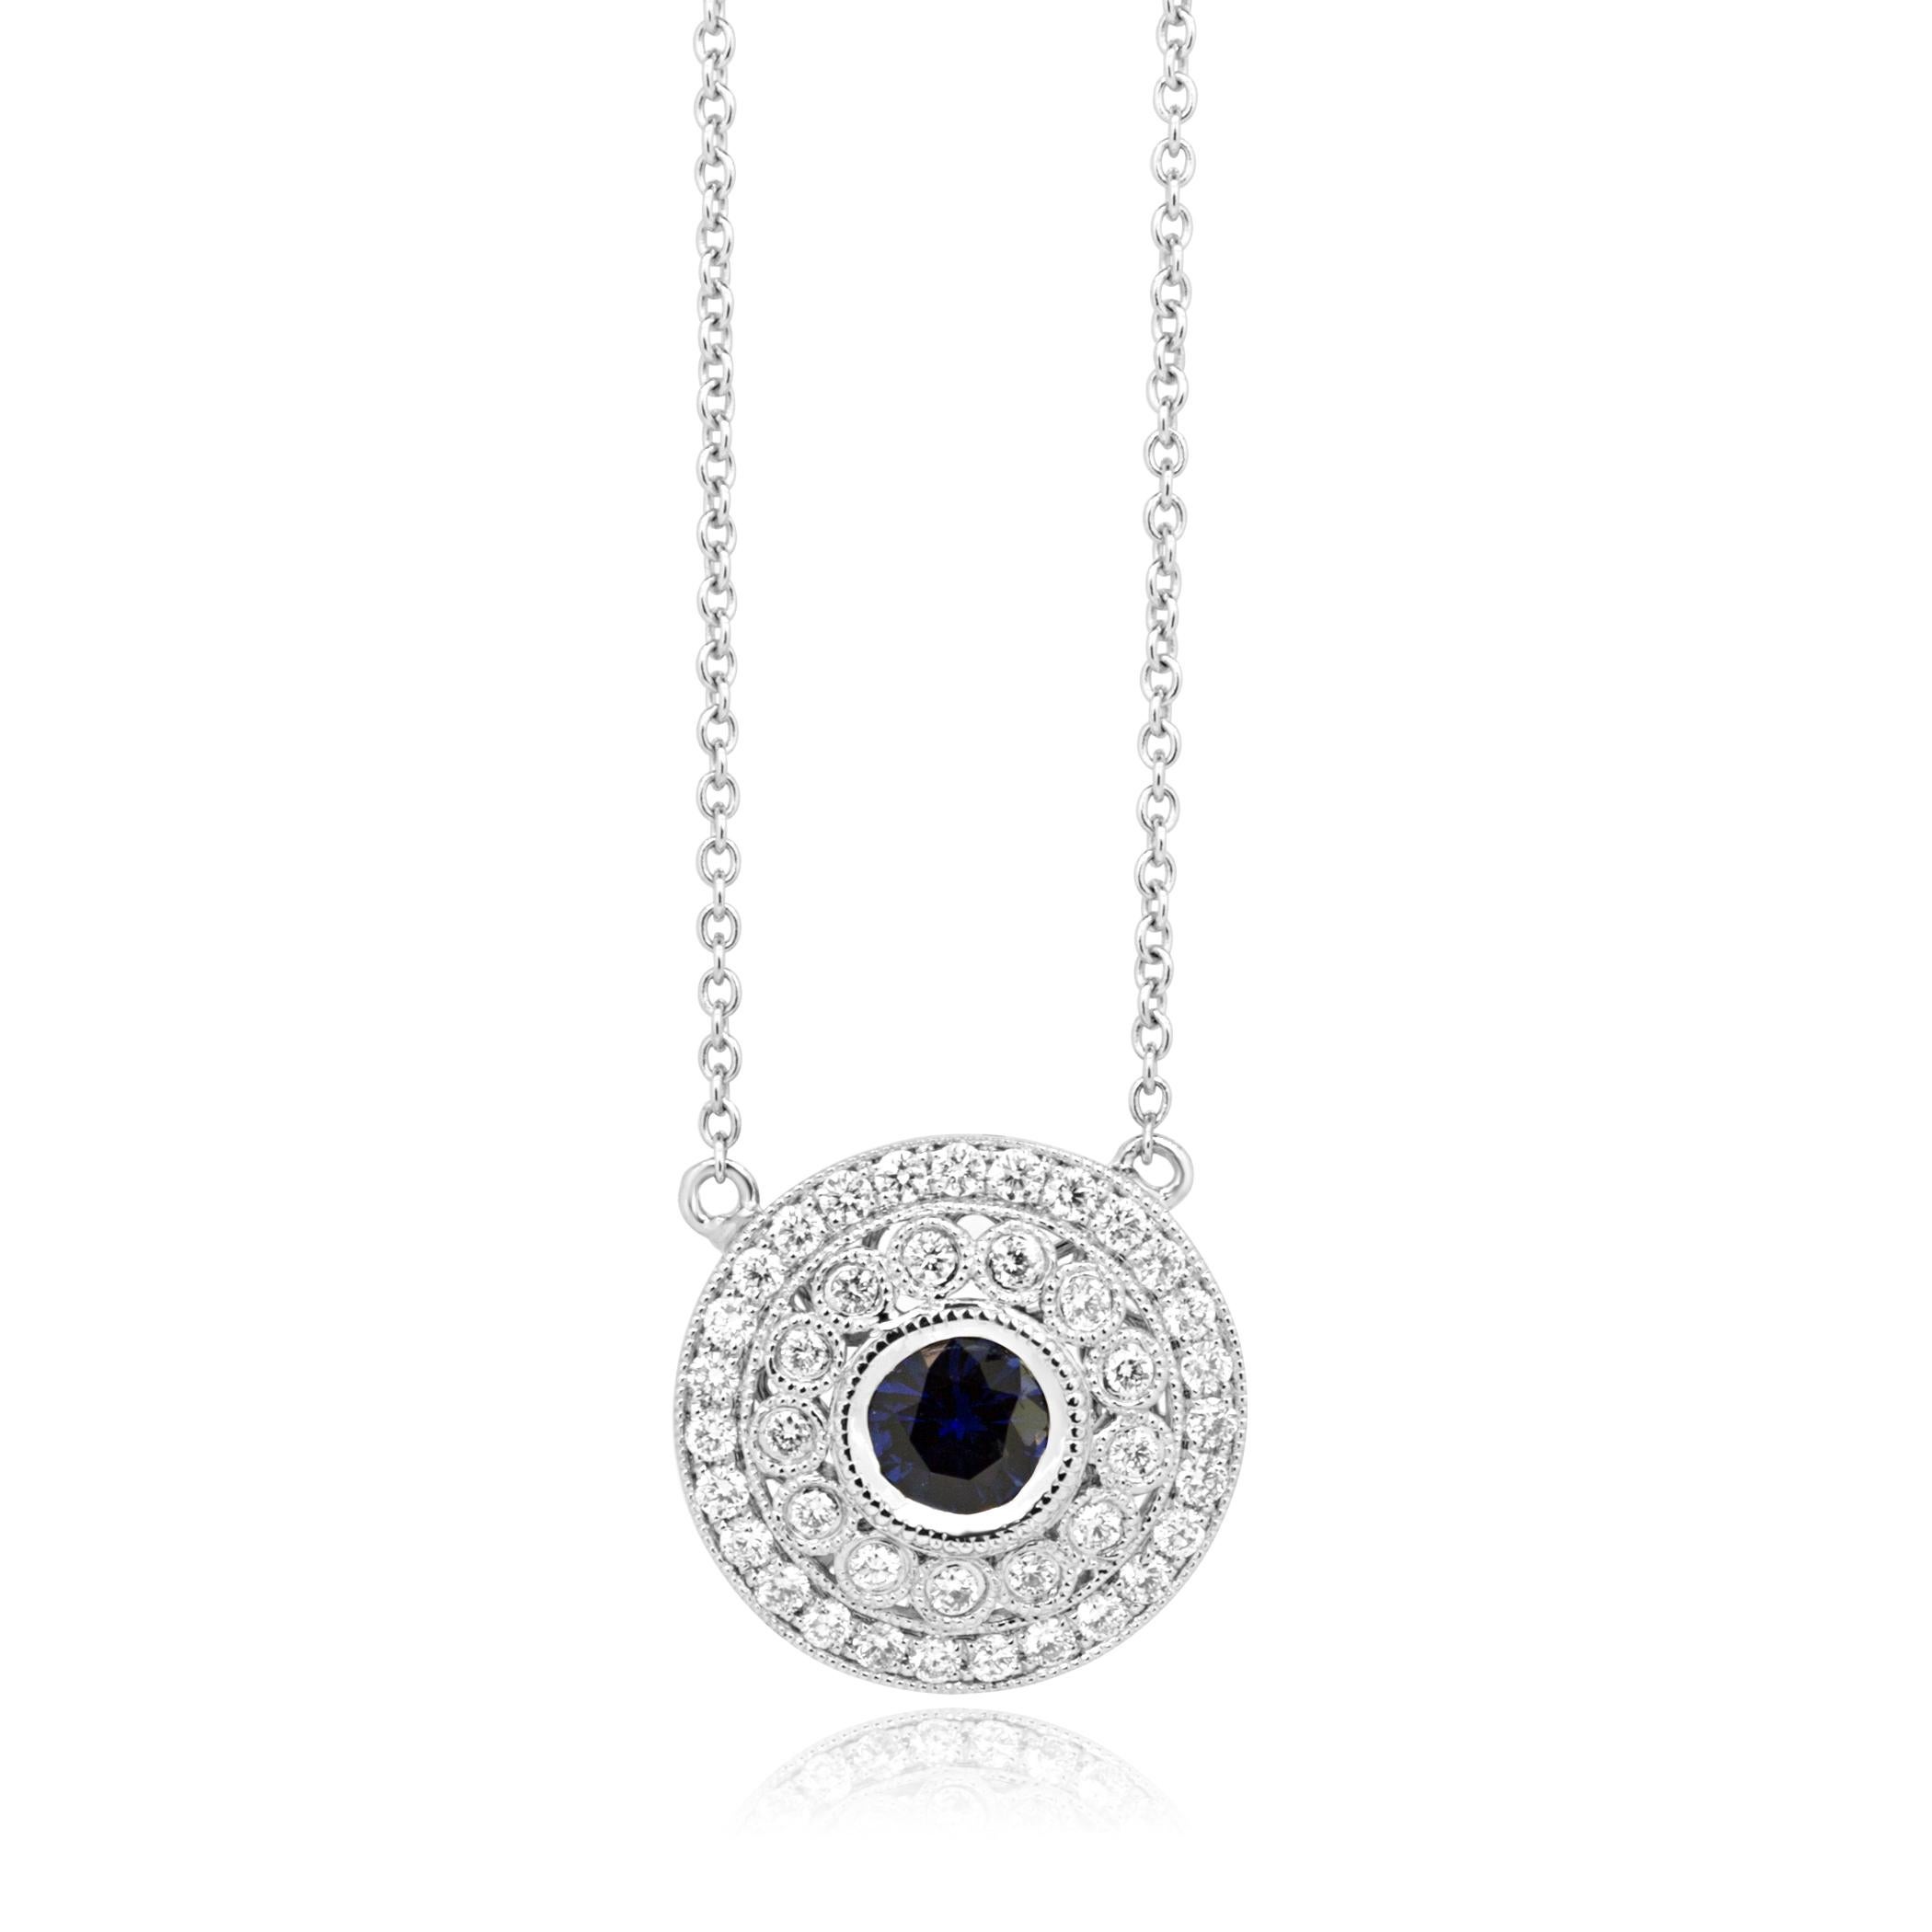 Blue Sapphire Round 0.53 Carat Encircled in a Double Halo of White Round Diamonds 0.78 Carat in Stunning 14K White Gold Pendant With Diamond By Yard Necklace.

Style available in different price ranges. Prices are based on your selection of 4C's